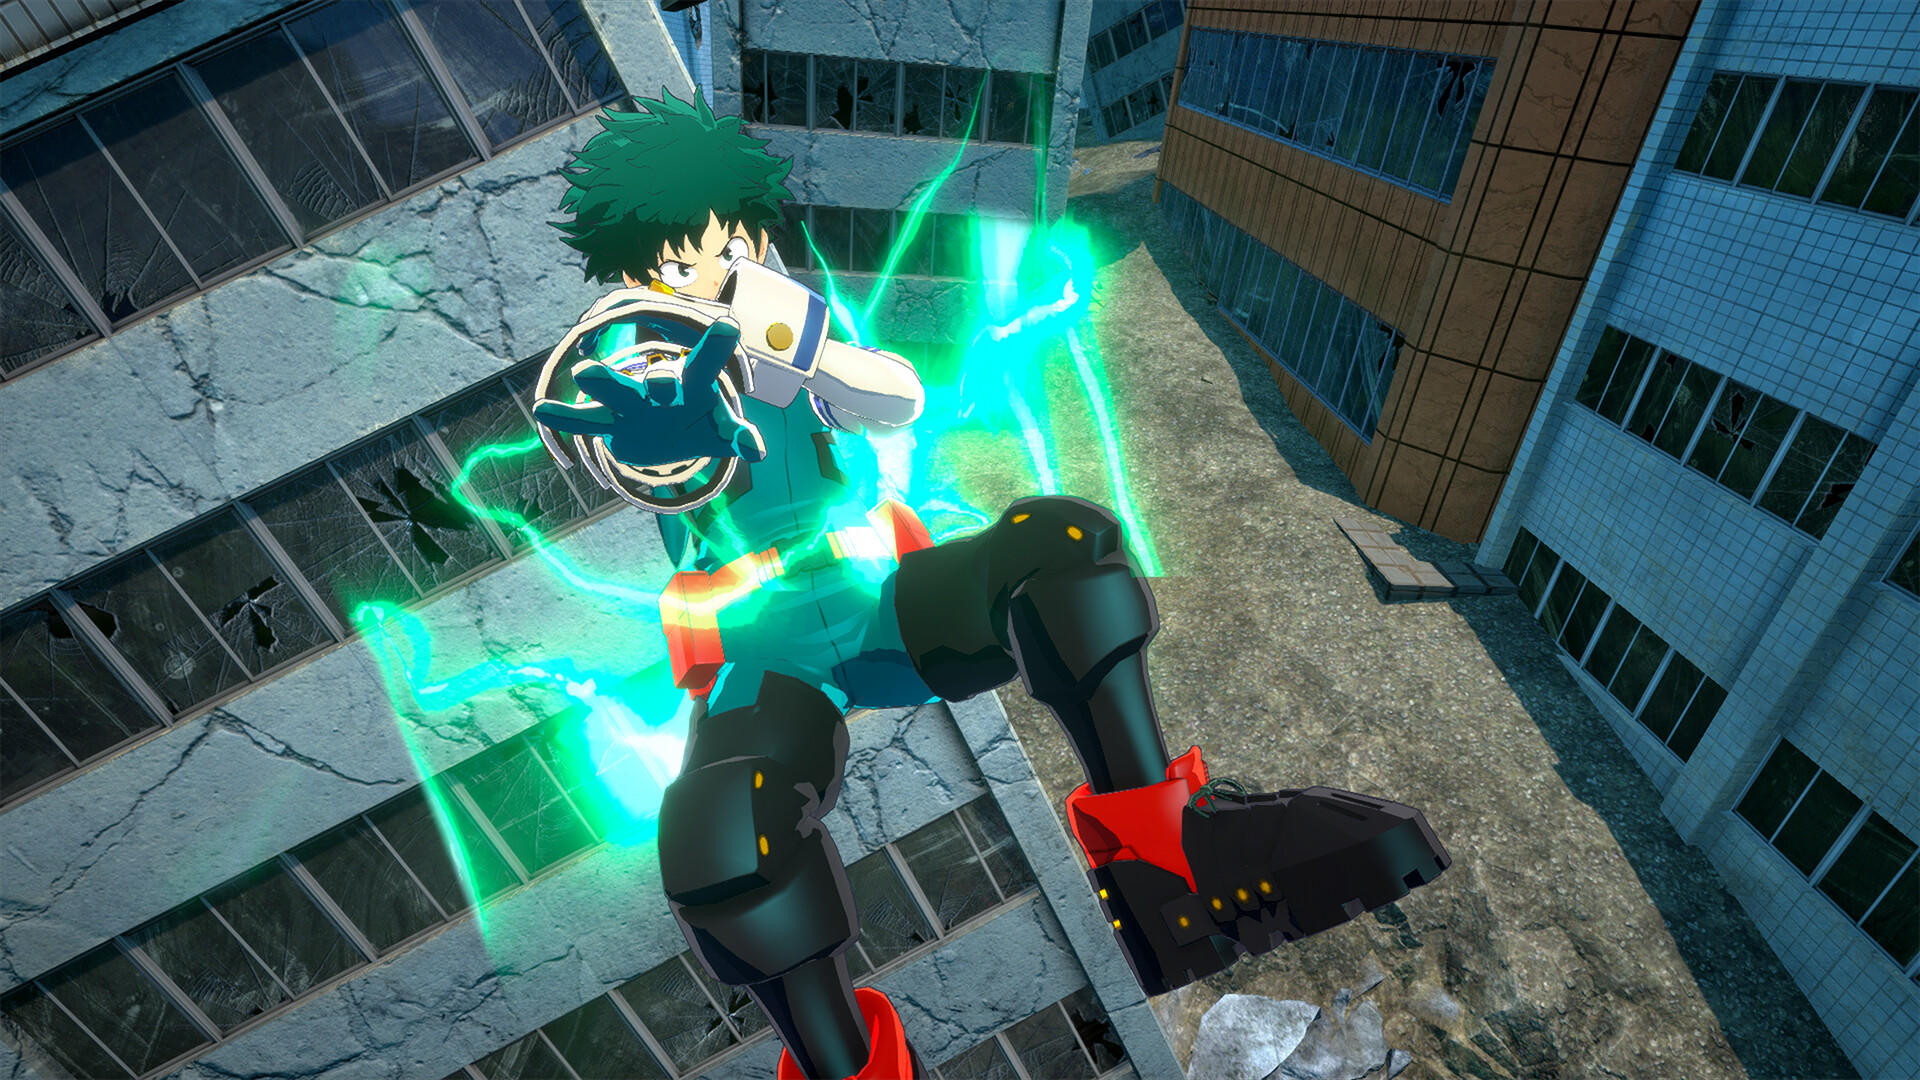 Free-To-Play Battle Royale, My Hero Academia: Ultra Rumble